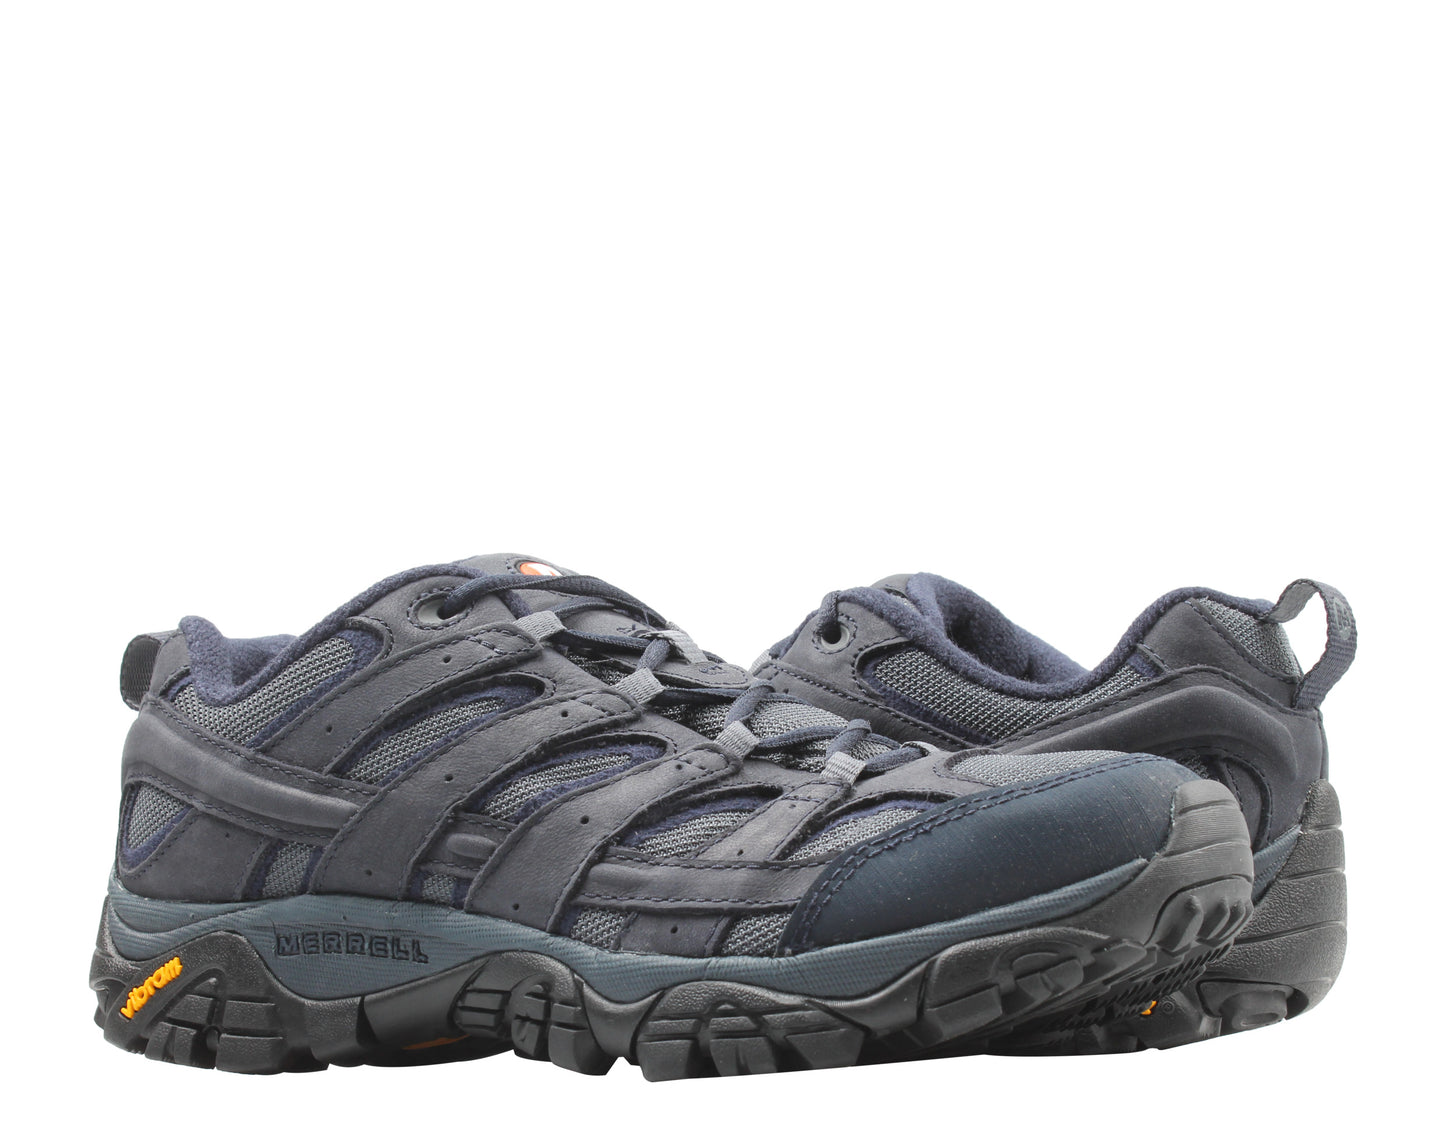 Merrell Moab 2 Smooth Men's Hiking Shoes